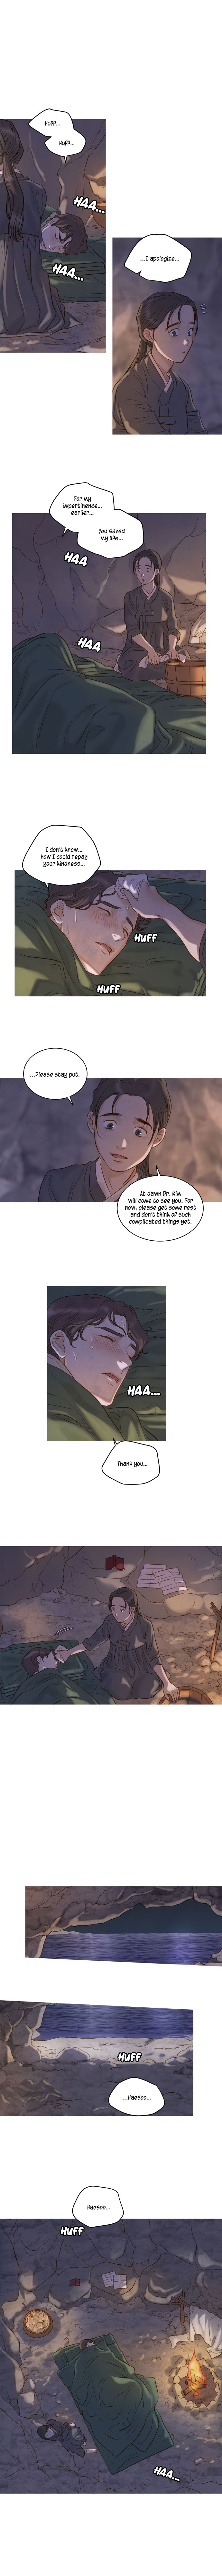 Gorae Byul – The Gyeongseong Mermaid Chapter 3 - Page 4